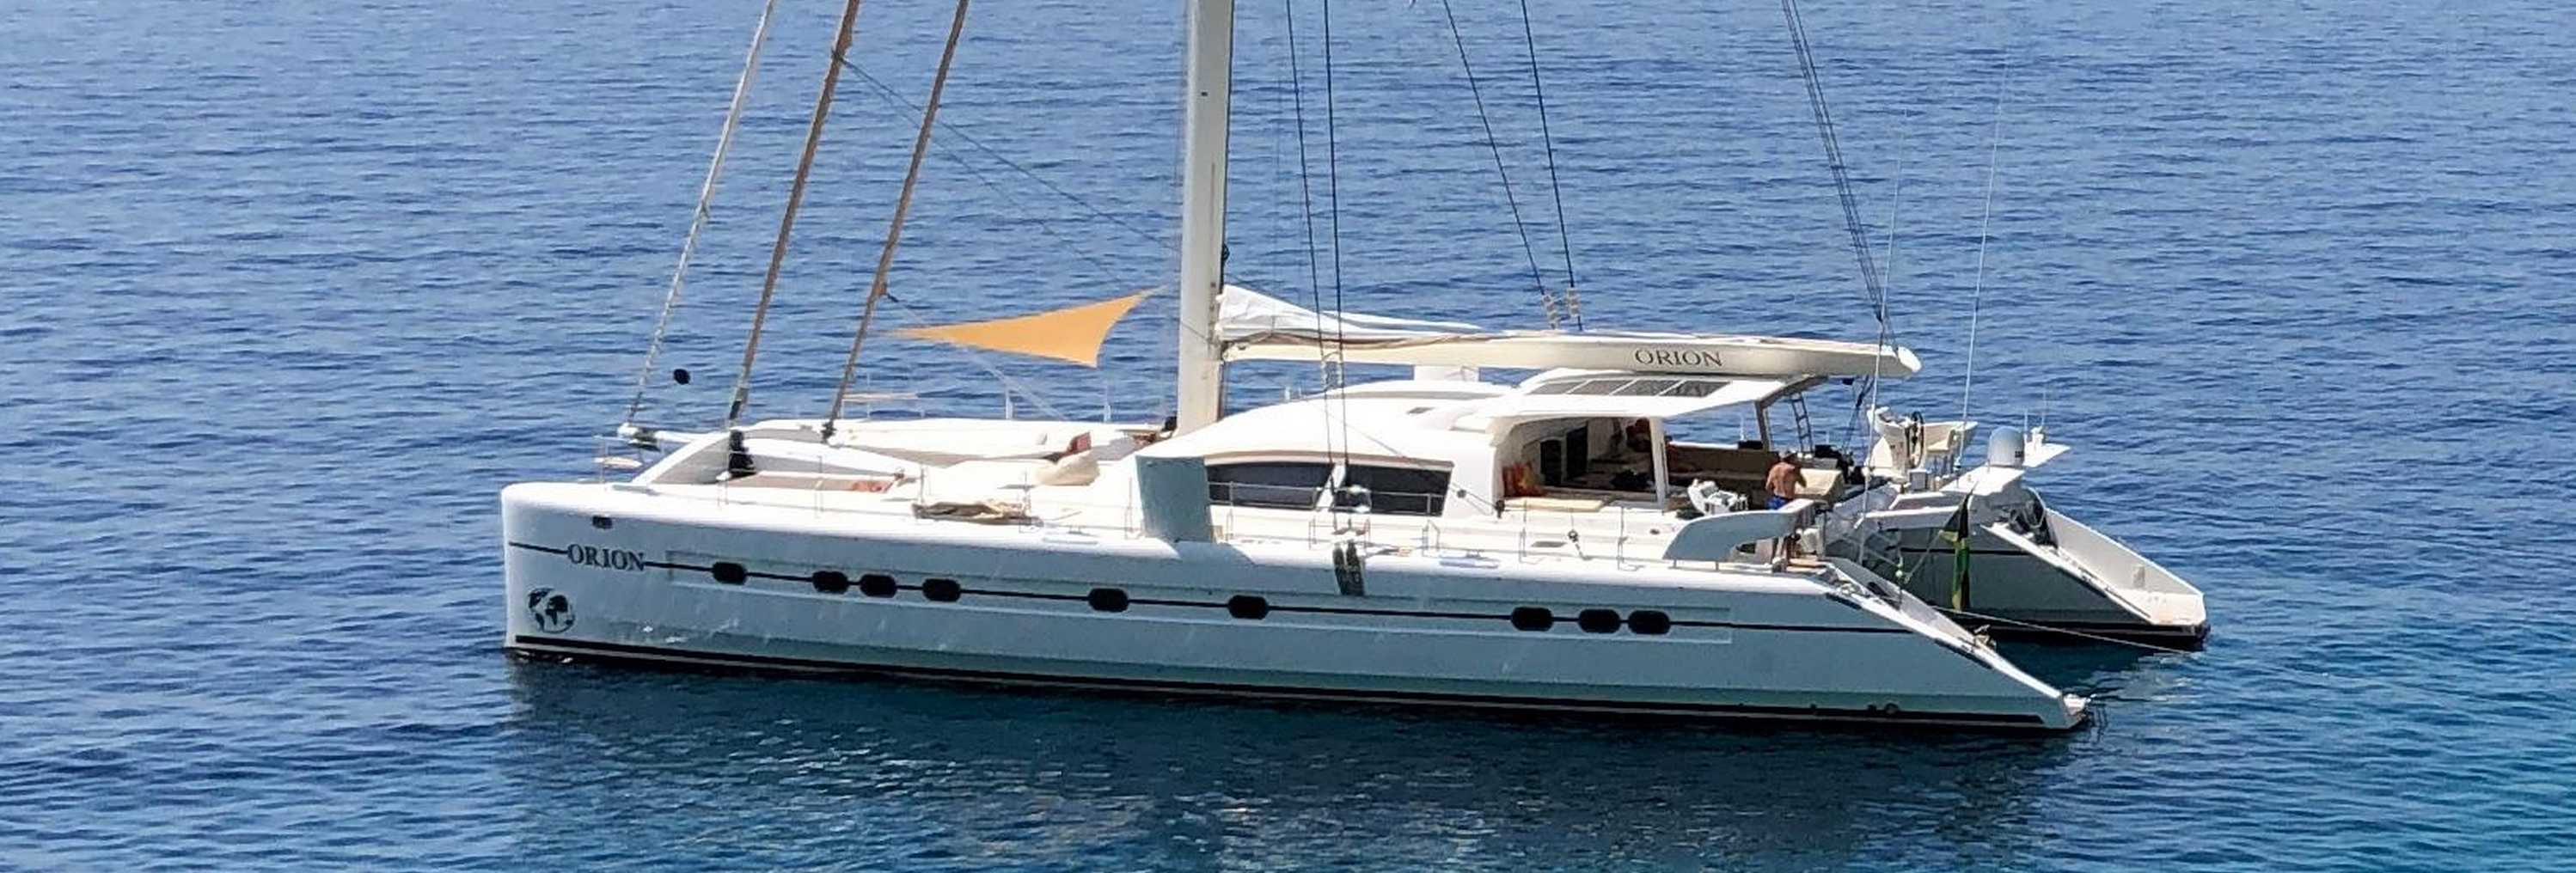 ORION : New Catamaran for Sale